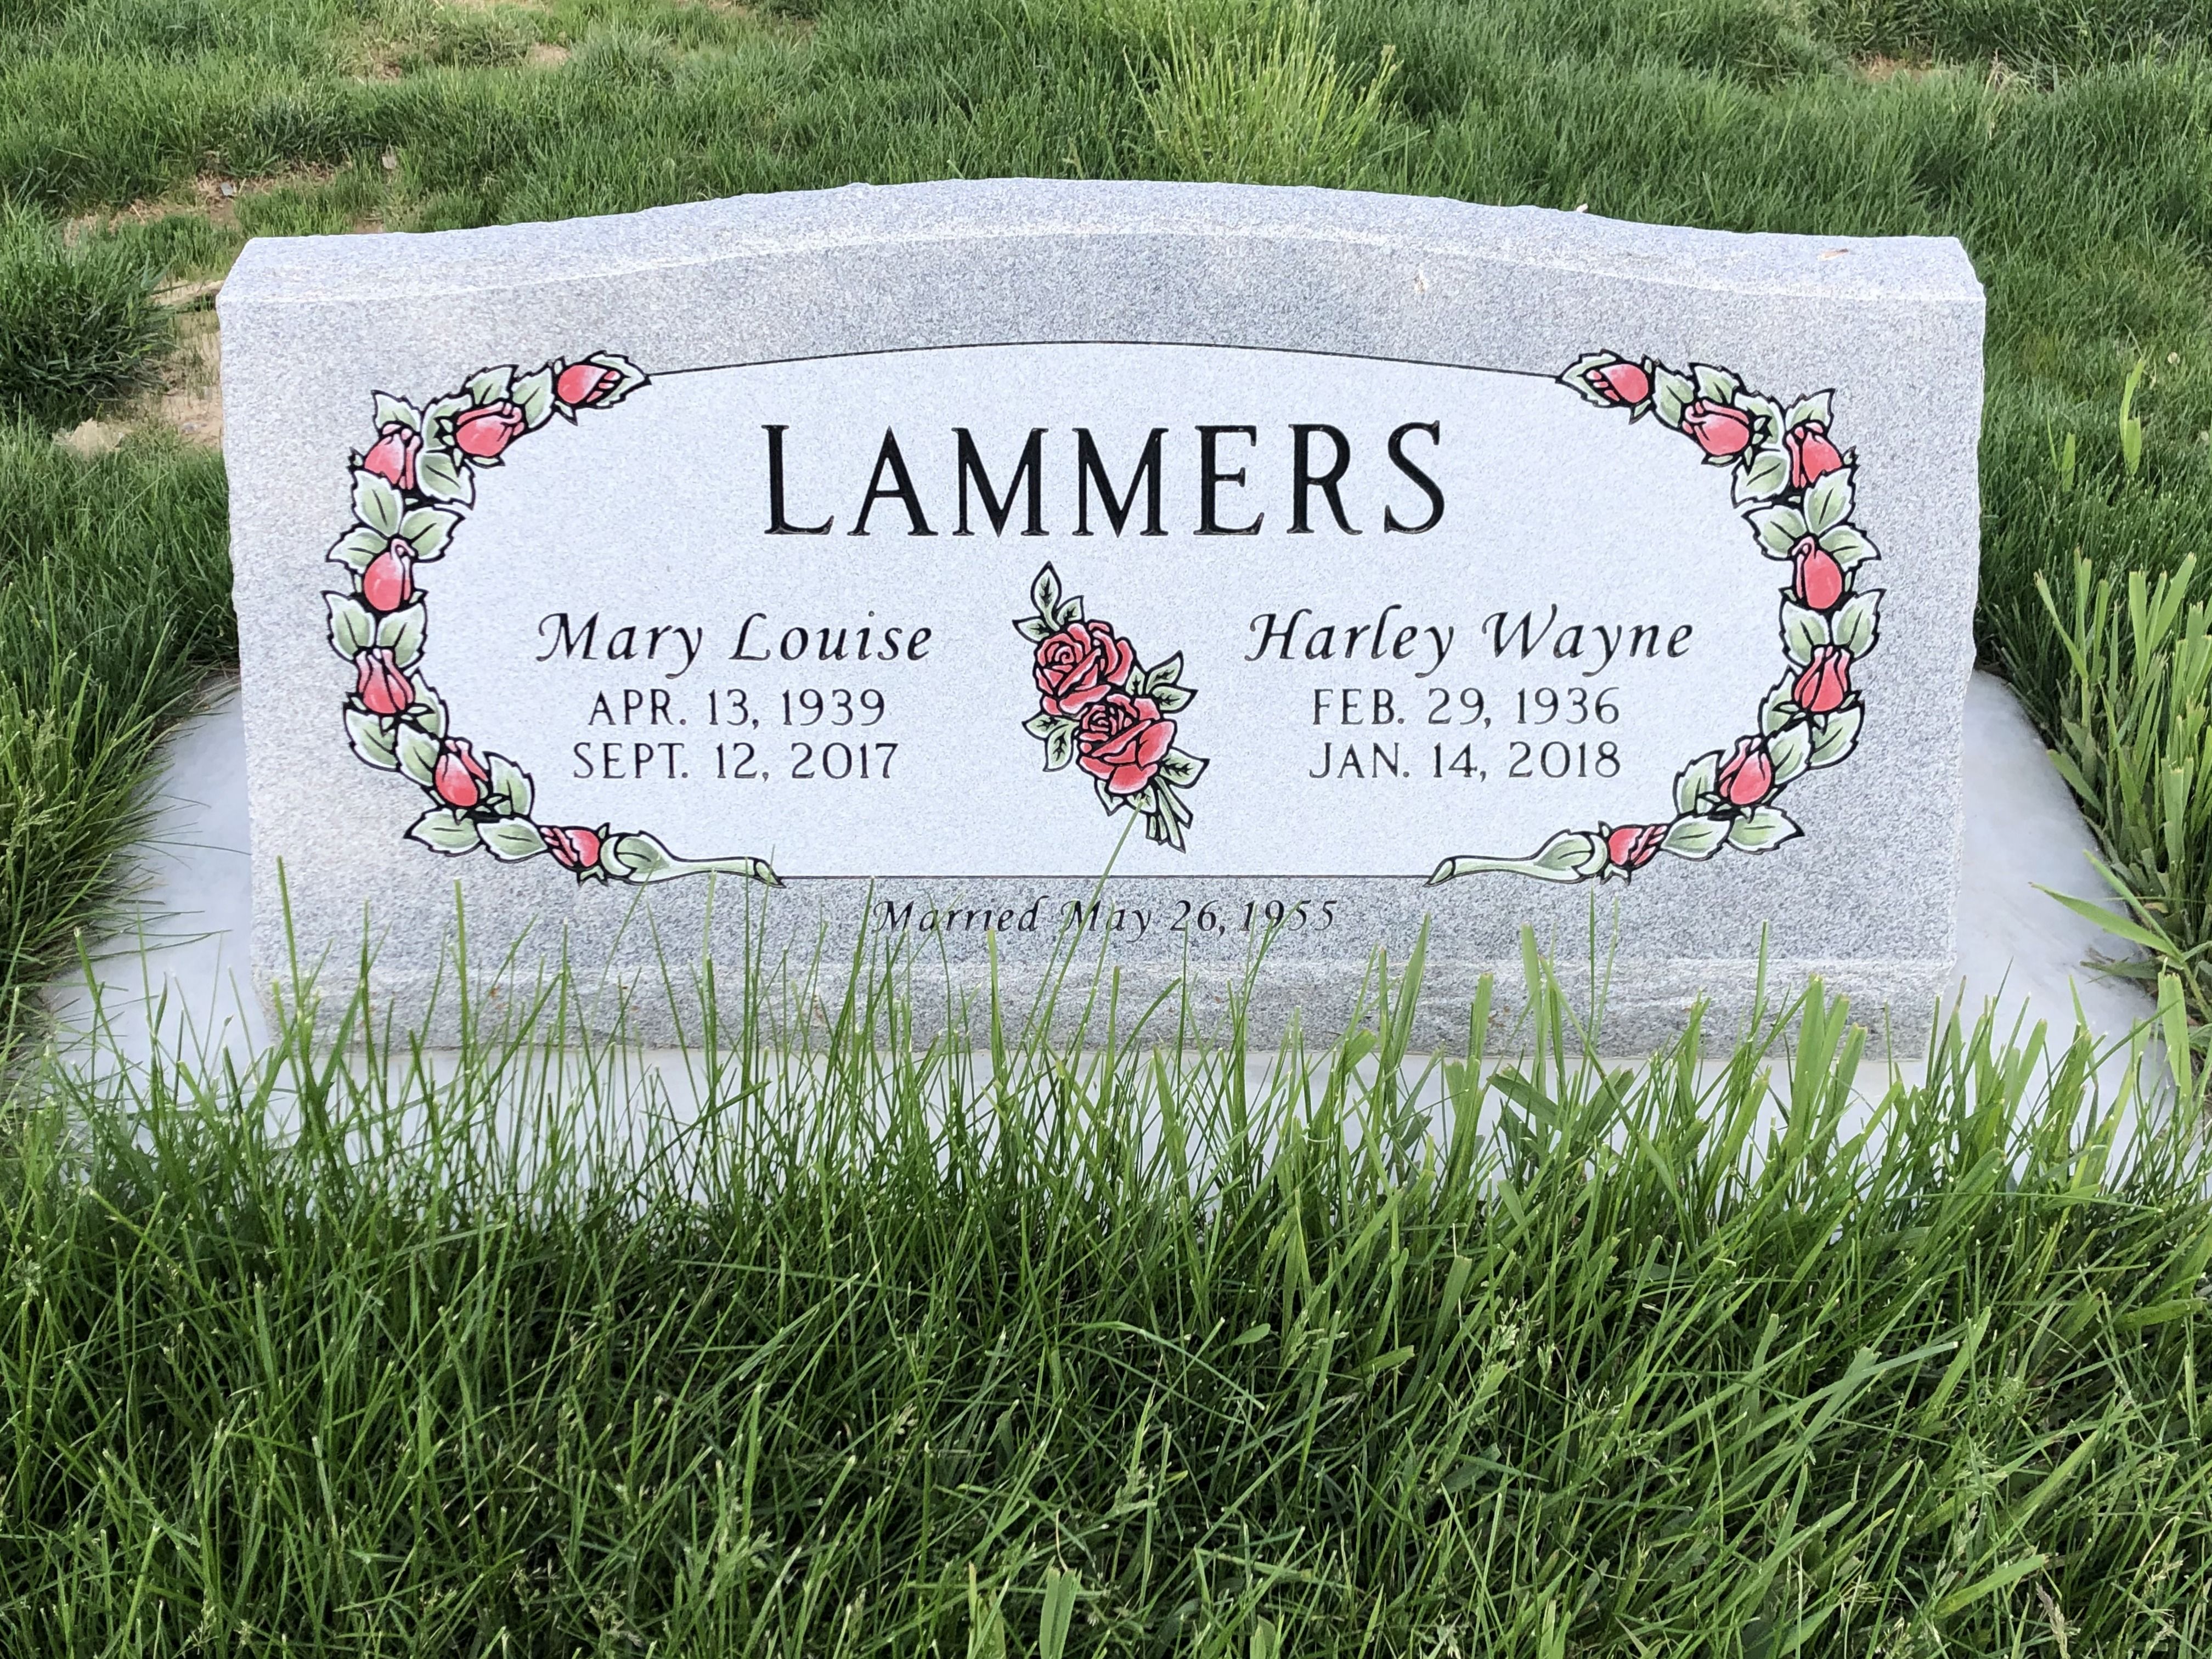 Mary Louise Richey Lammers (1939-2017)